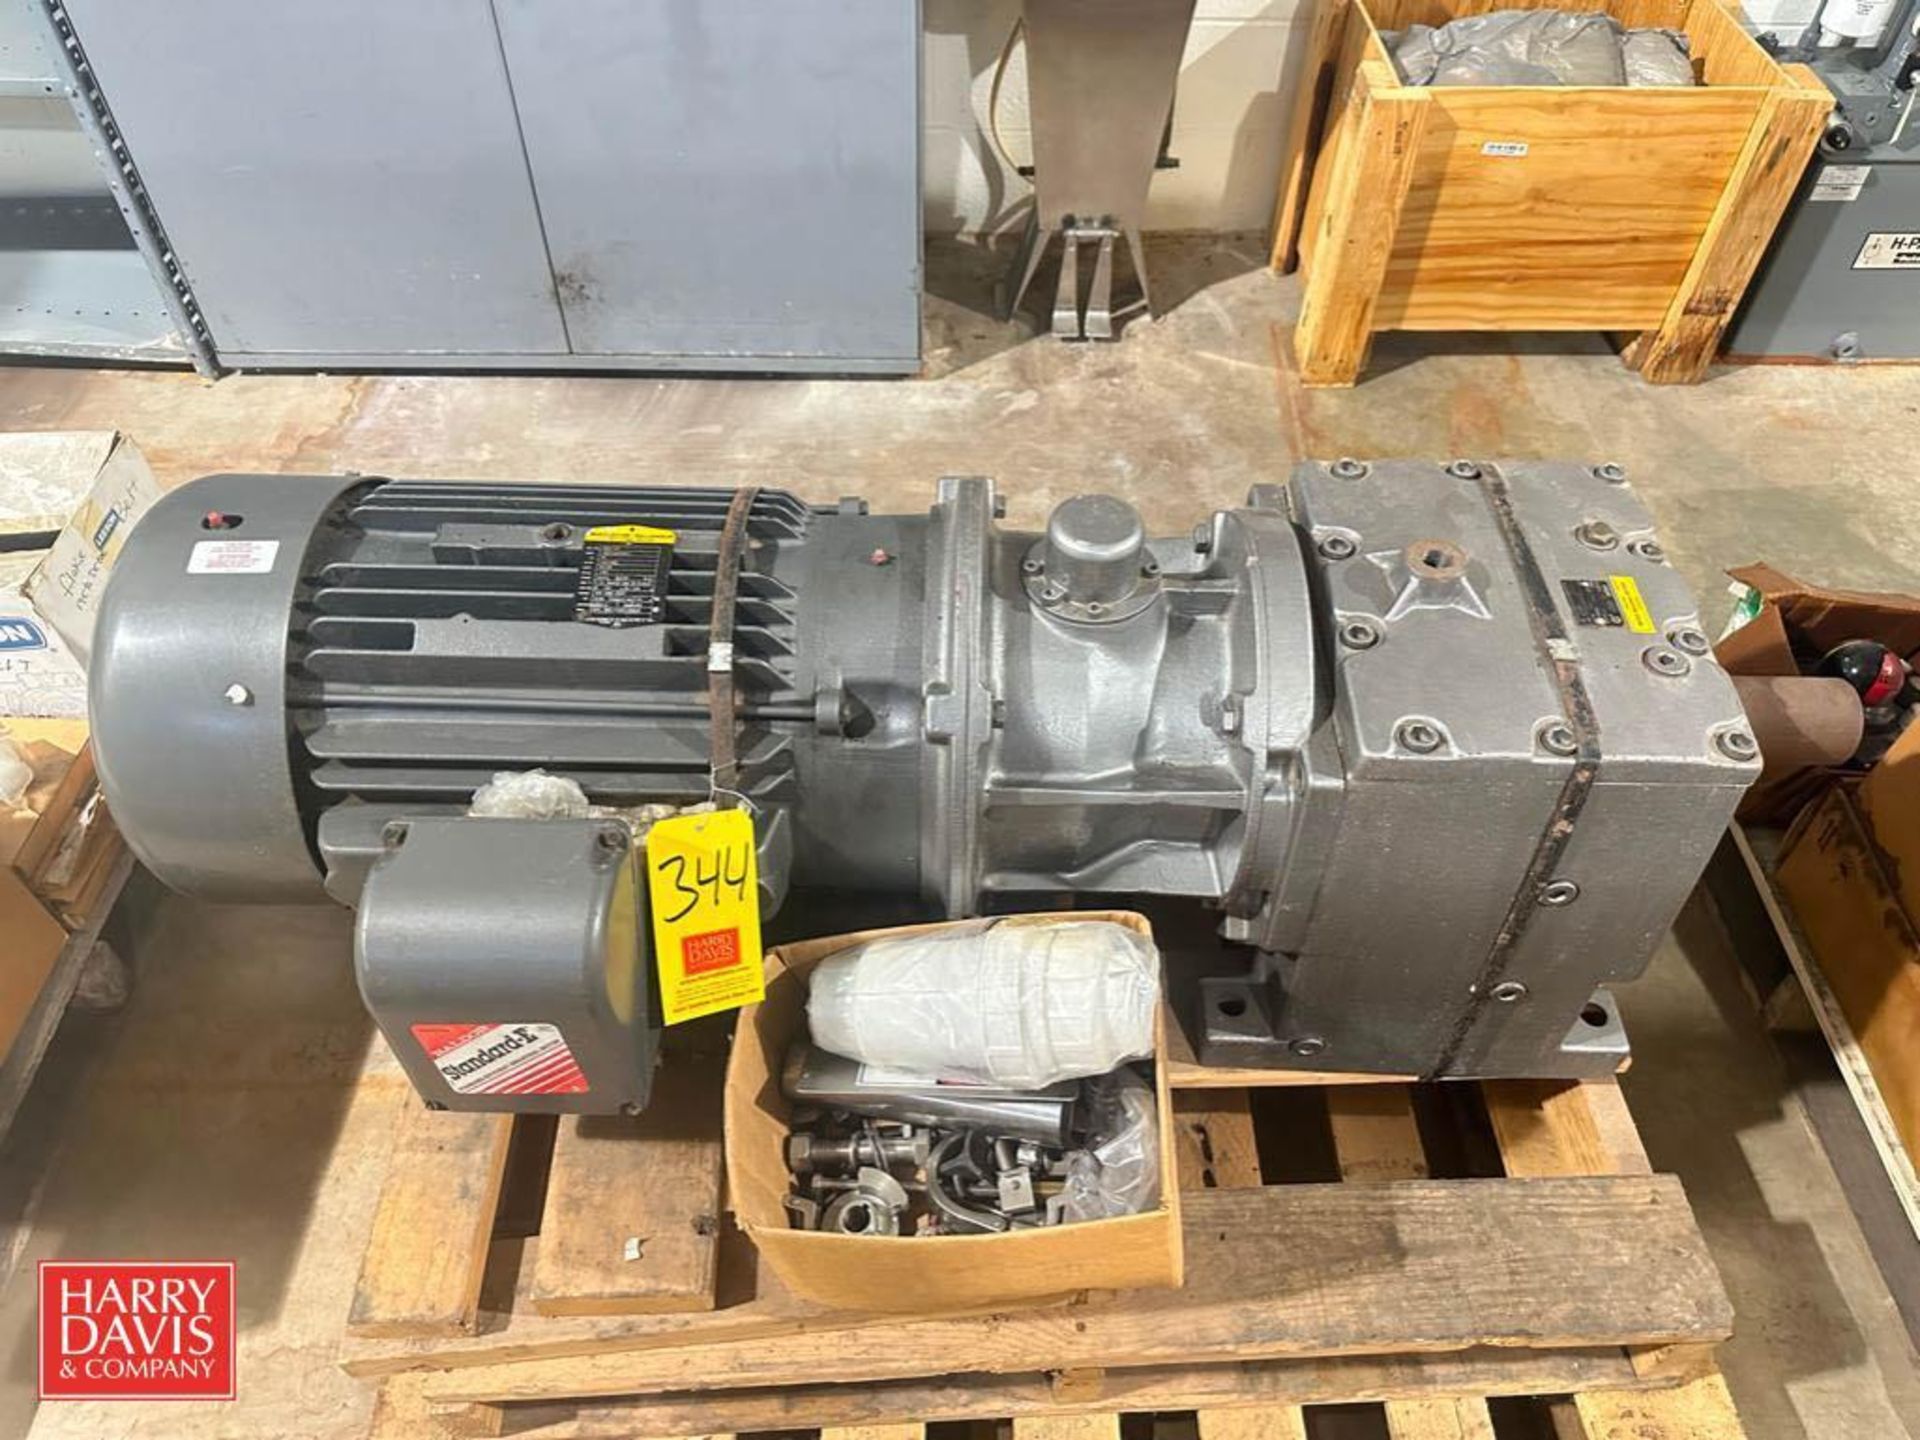 NEW Baldor 40 HP 1,765 RPM Motor with Nord 104 RPM Gear Reducing Drive